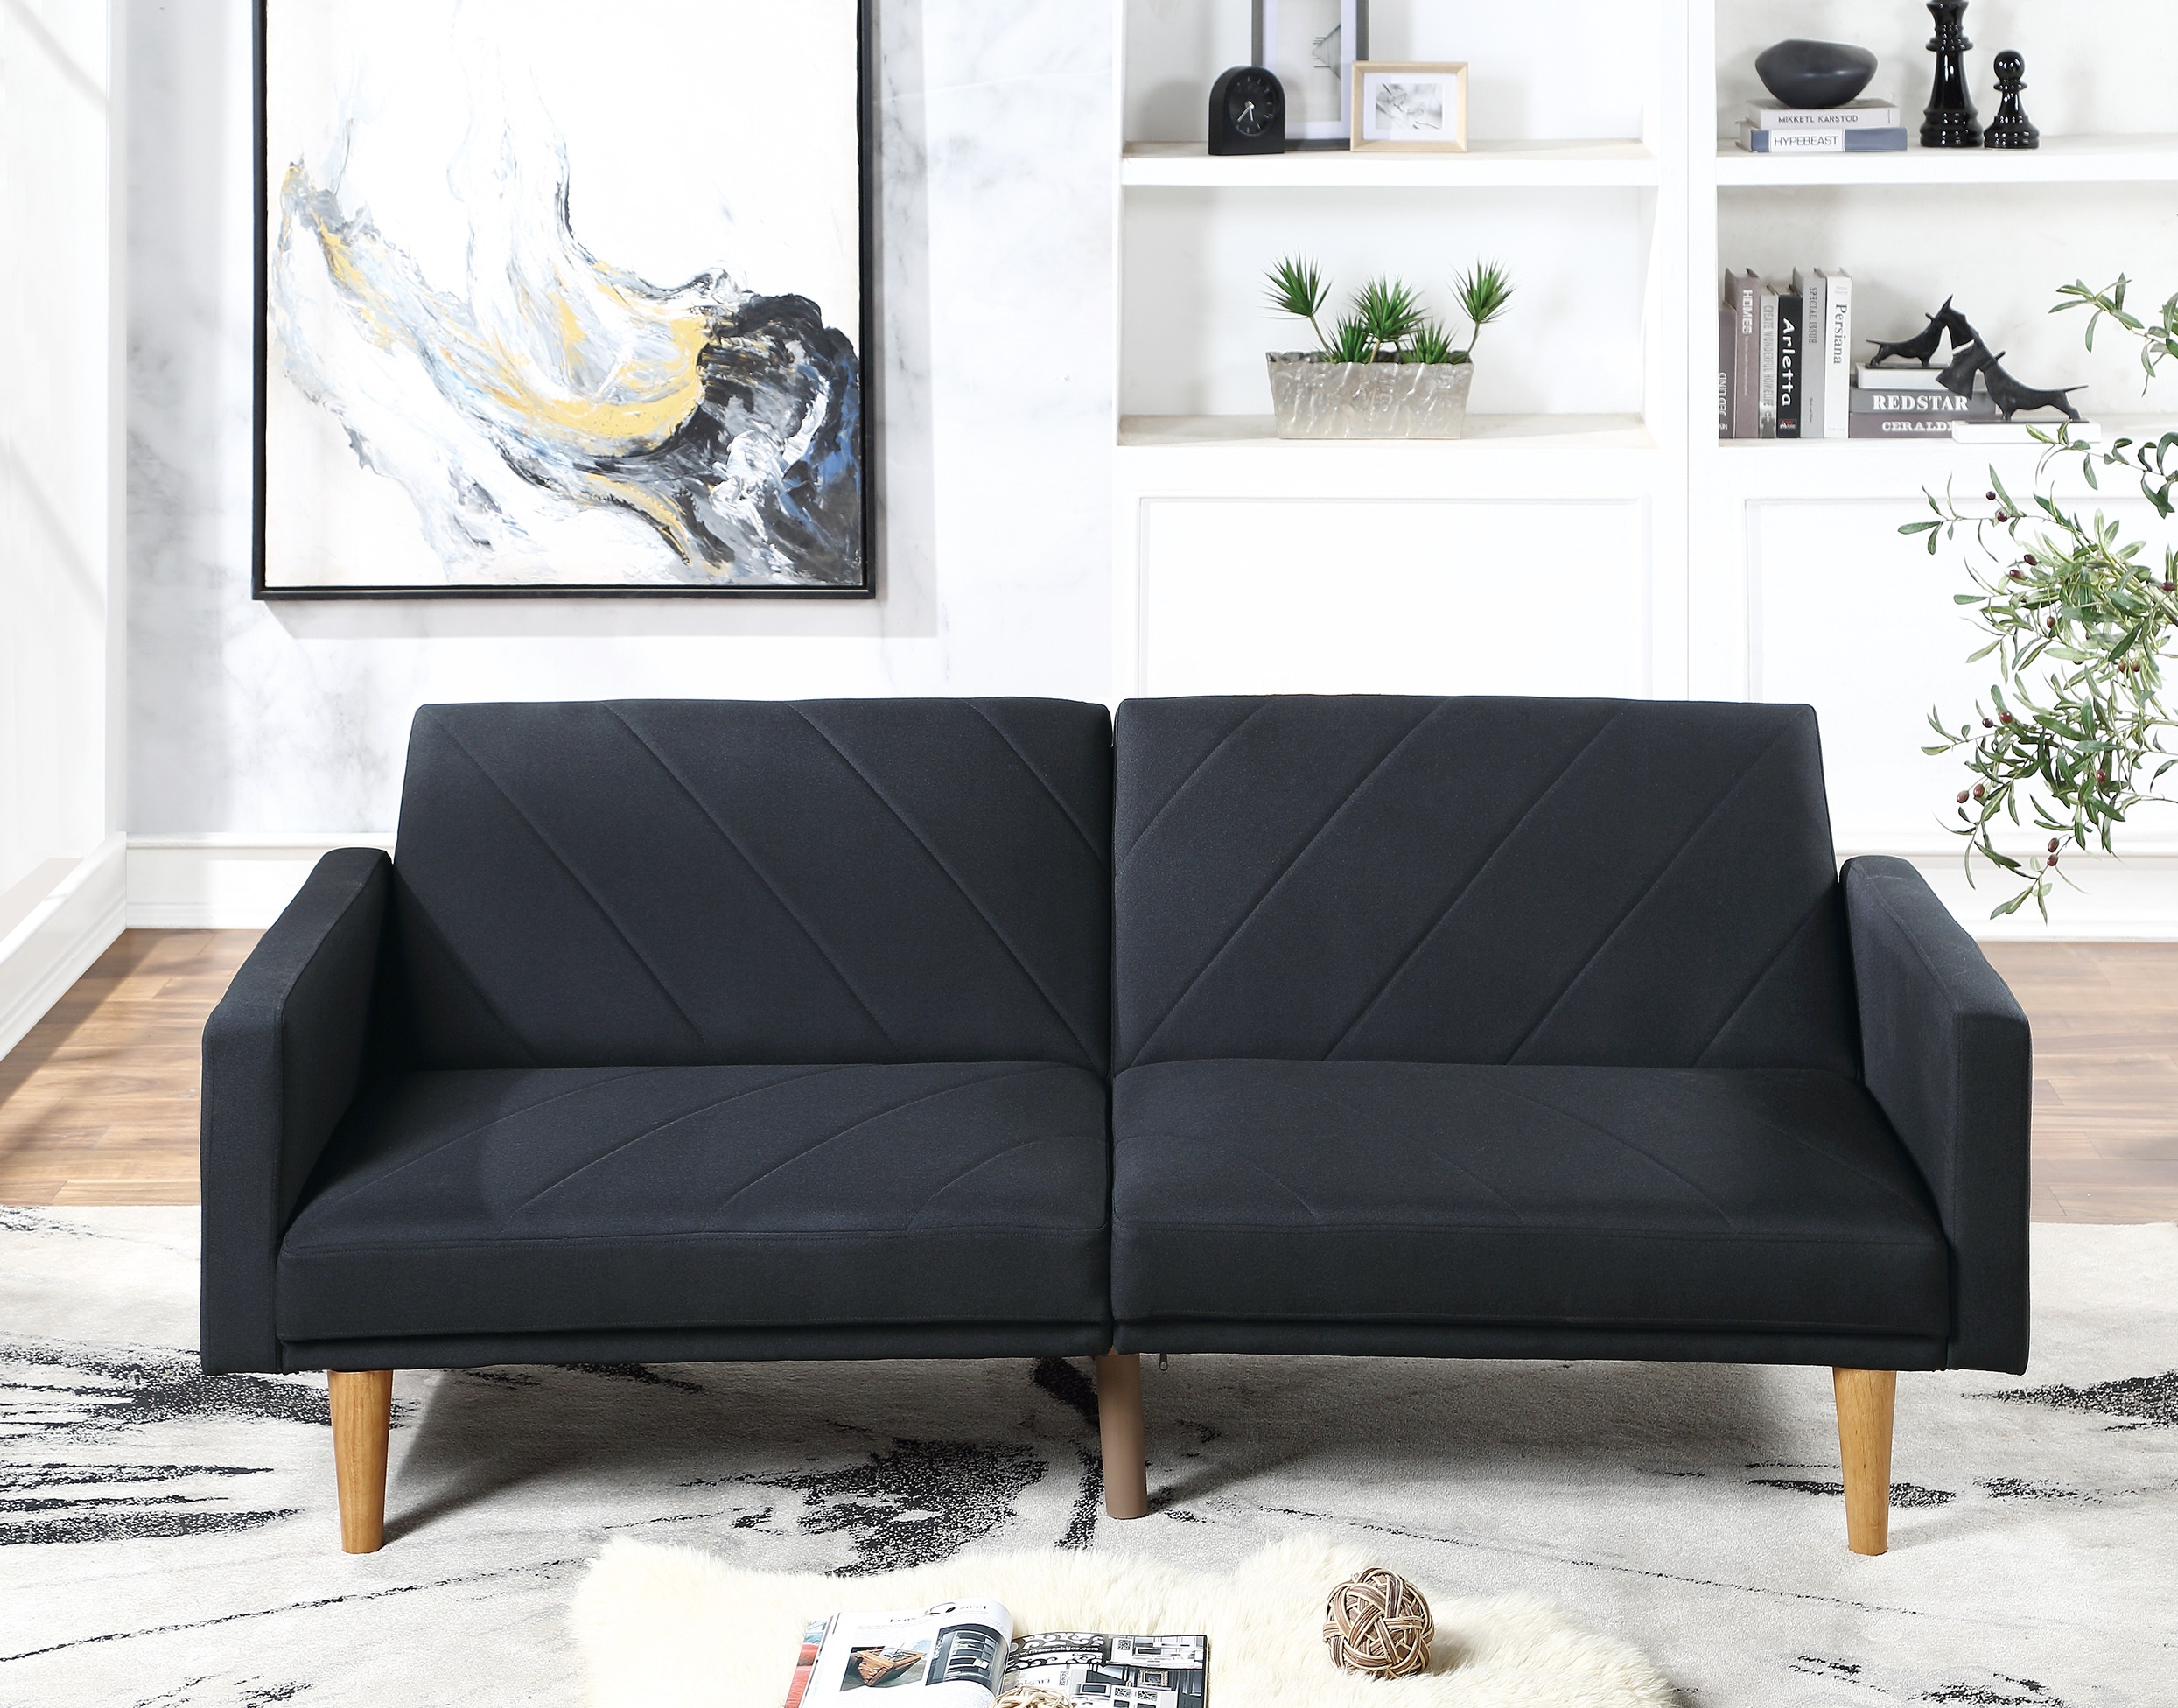 Modern Electric Look 1pc Convertible Sofa Couch Black Linen Like Fabric Cushion Clean Lines Wooden Legs Living Room-Boyel Living